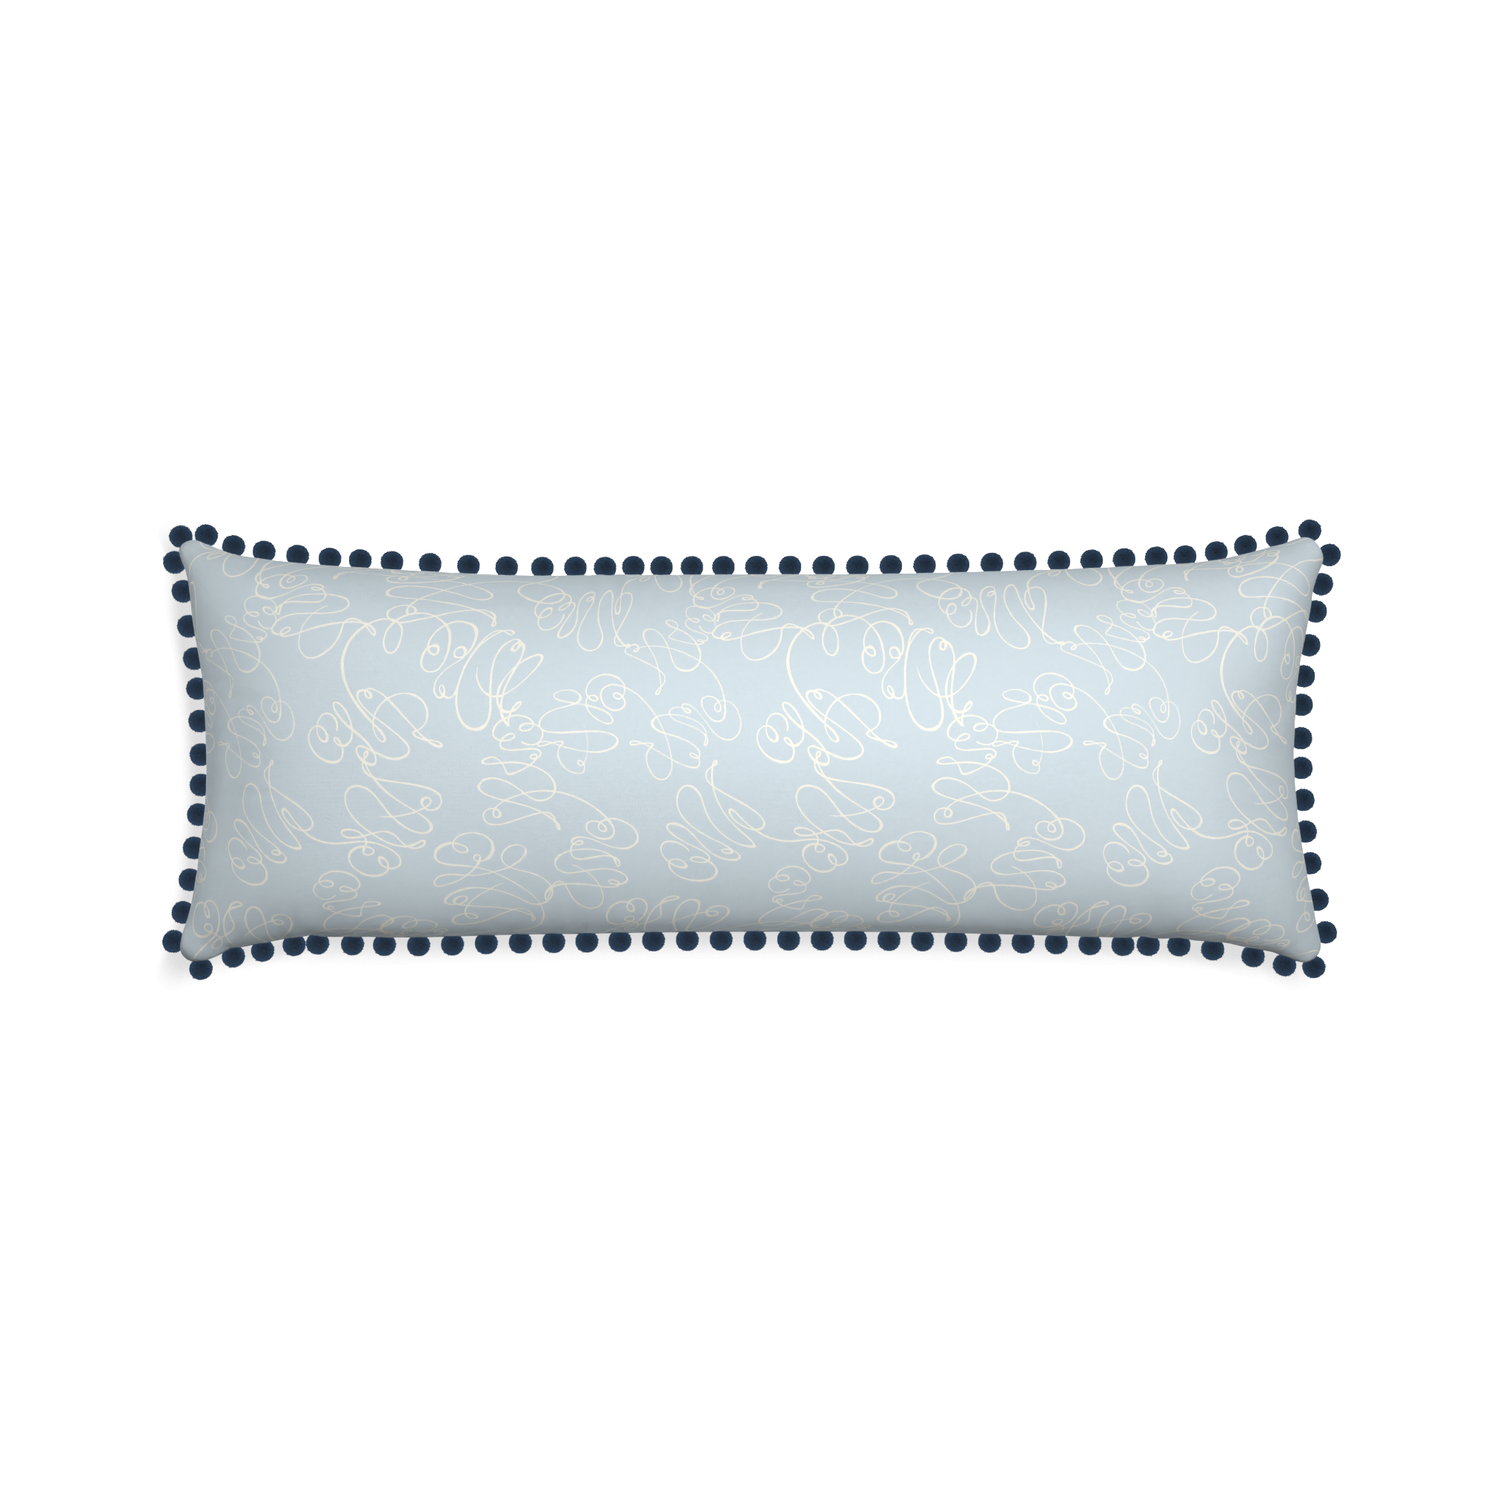 Xl-lumbar mirabella custom powder blue abstractpillow with c on white background